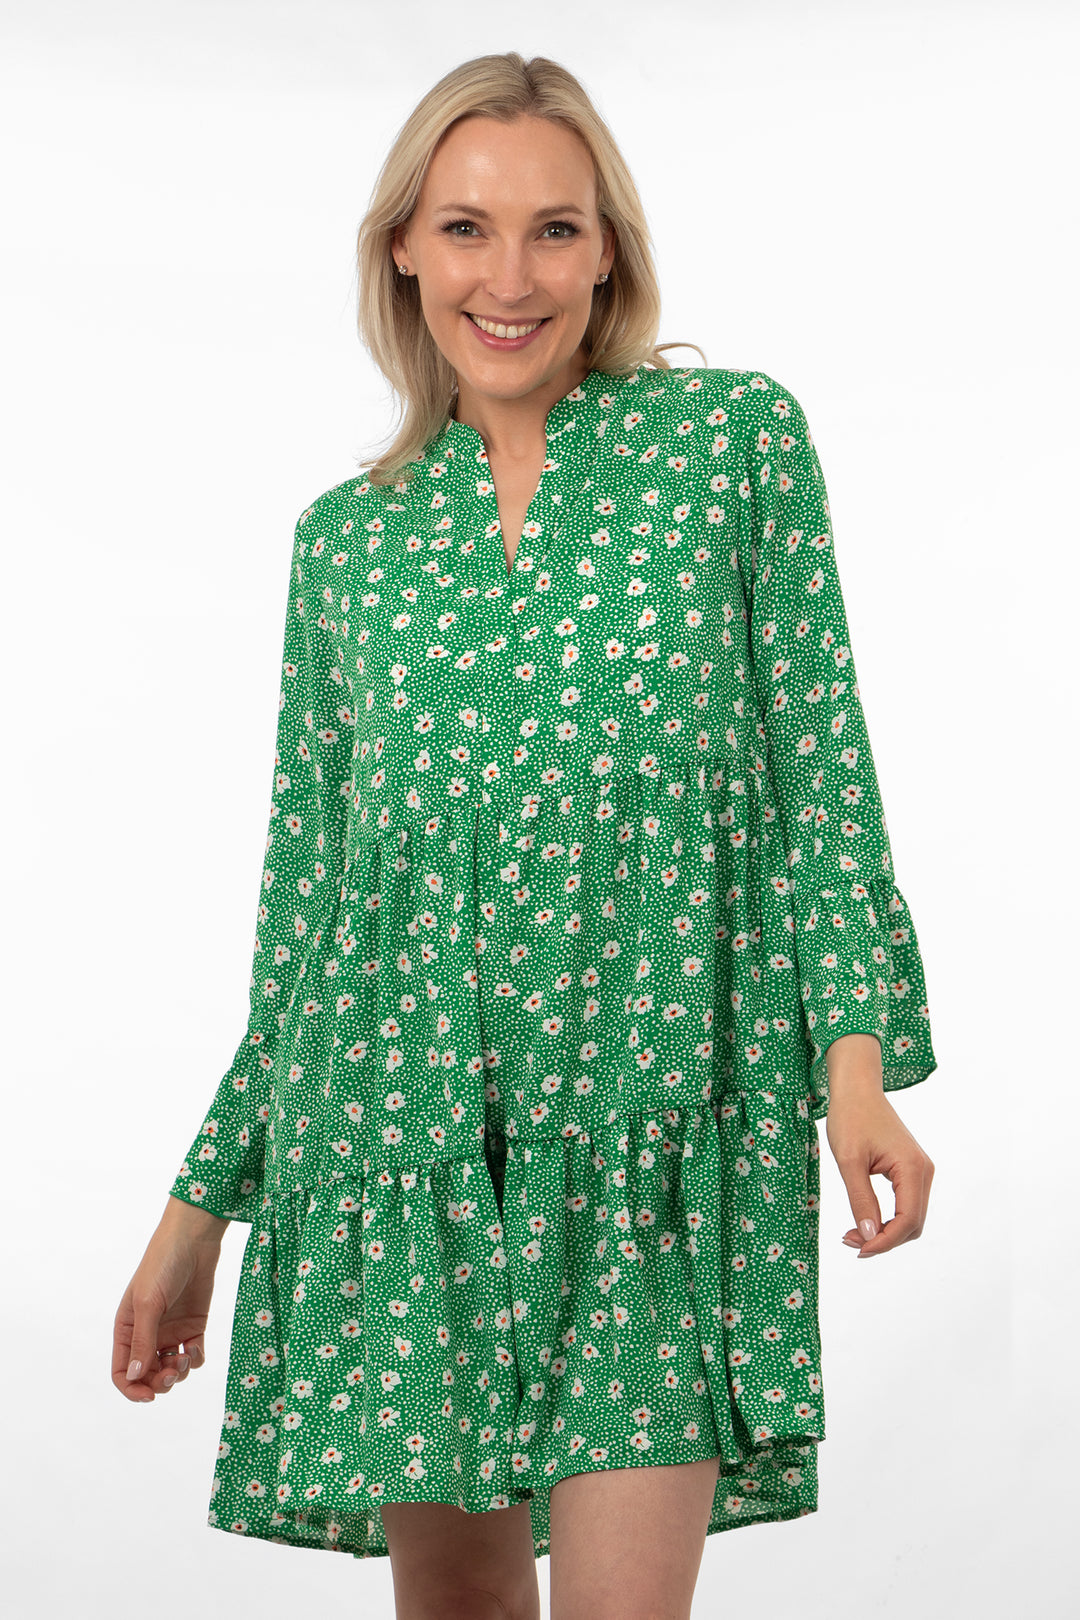 model wearing a green daisy floral print midi dress with long floaty sleeves and a tiered hem, the dress has a grandad style collar